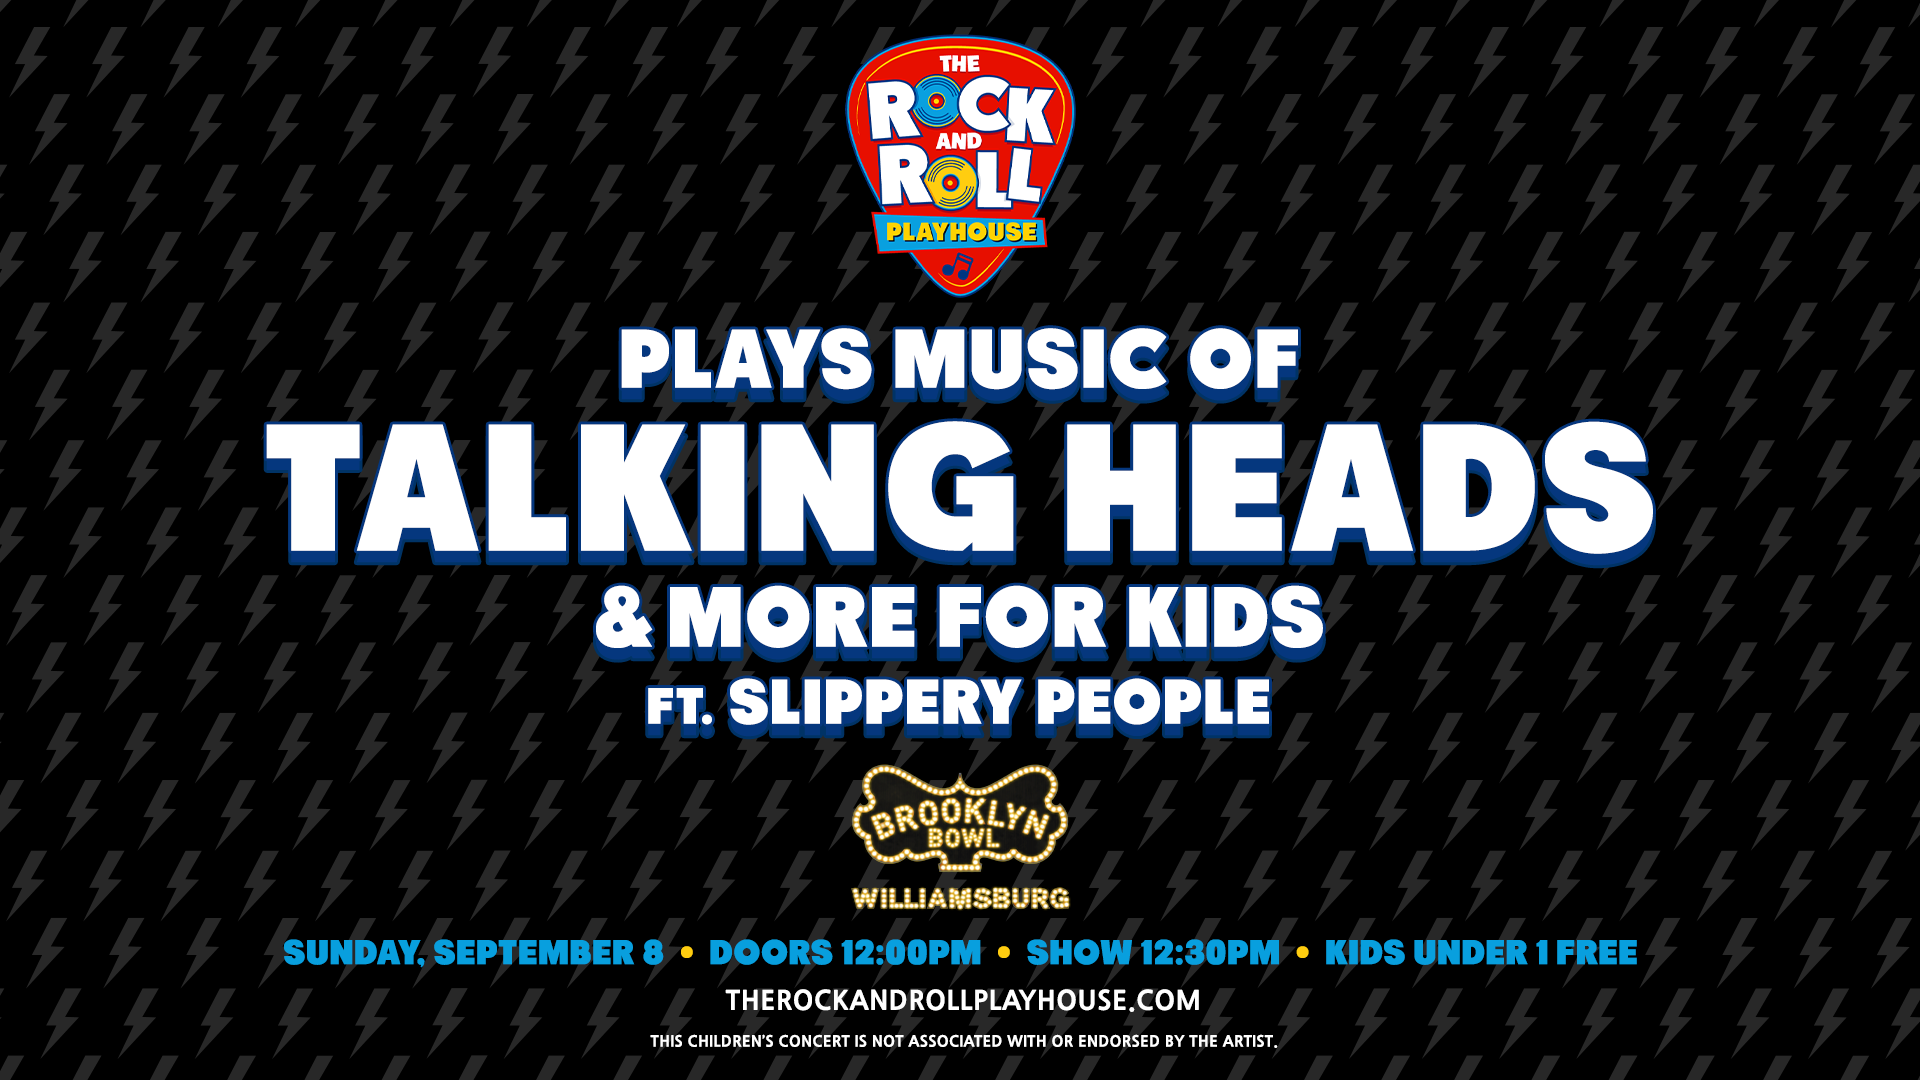 The Rock and Roll Playhouse plays the Music of Talking Heads + More